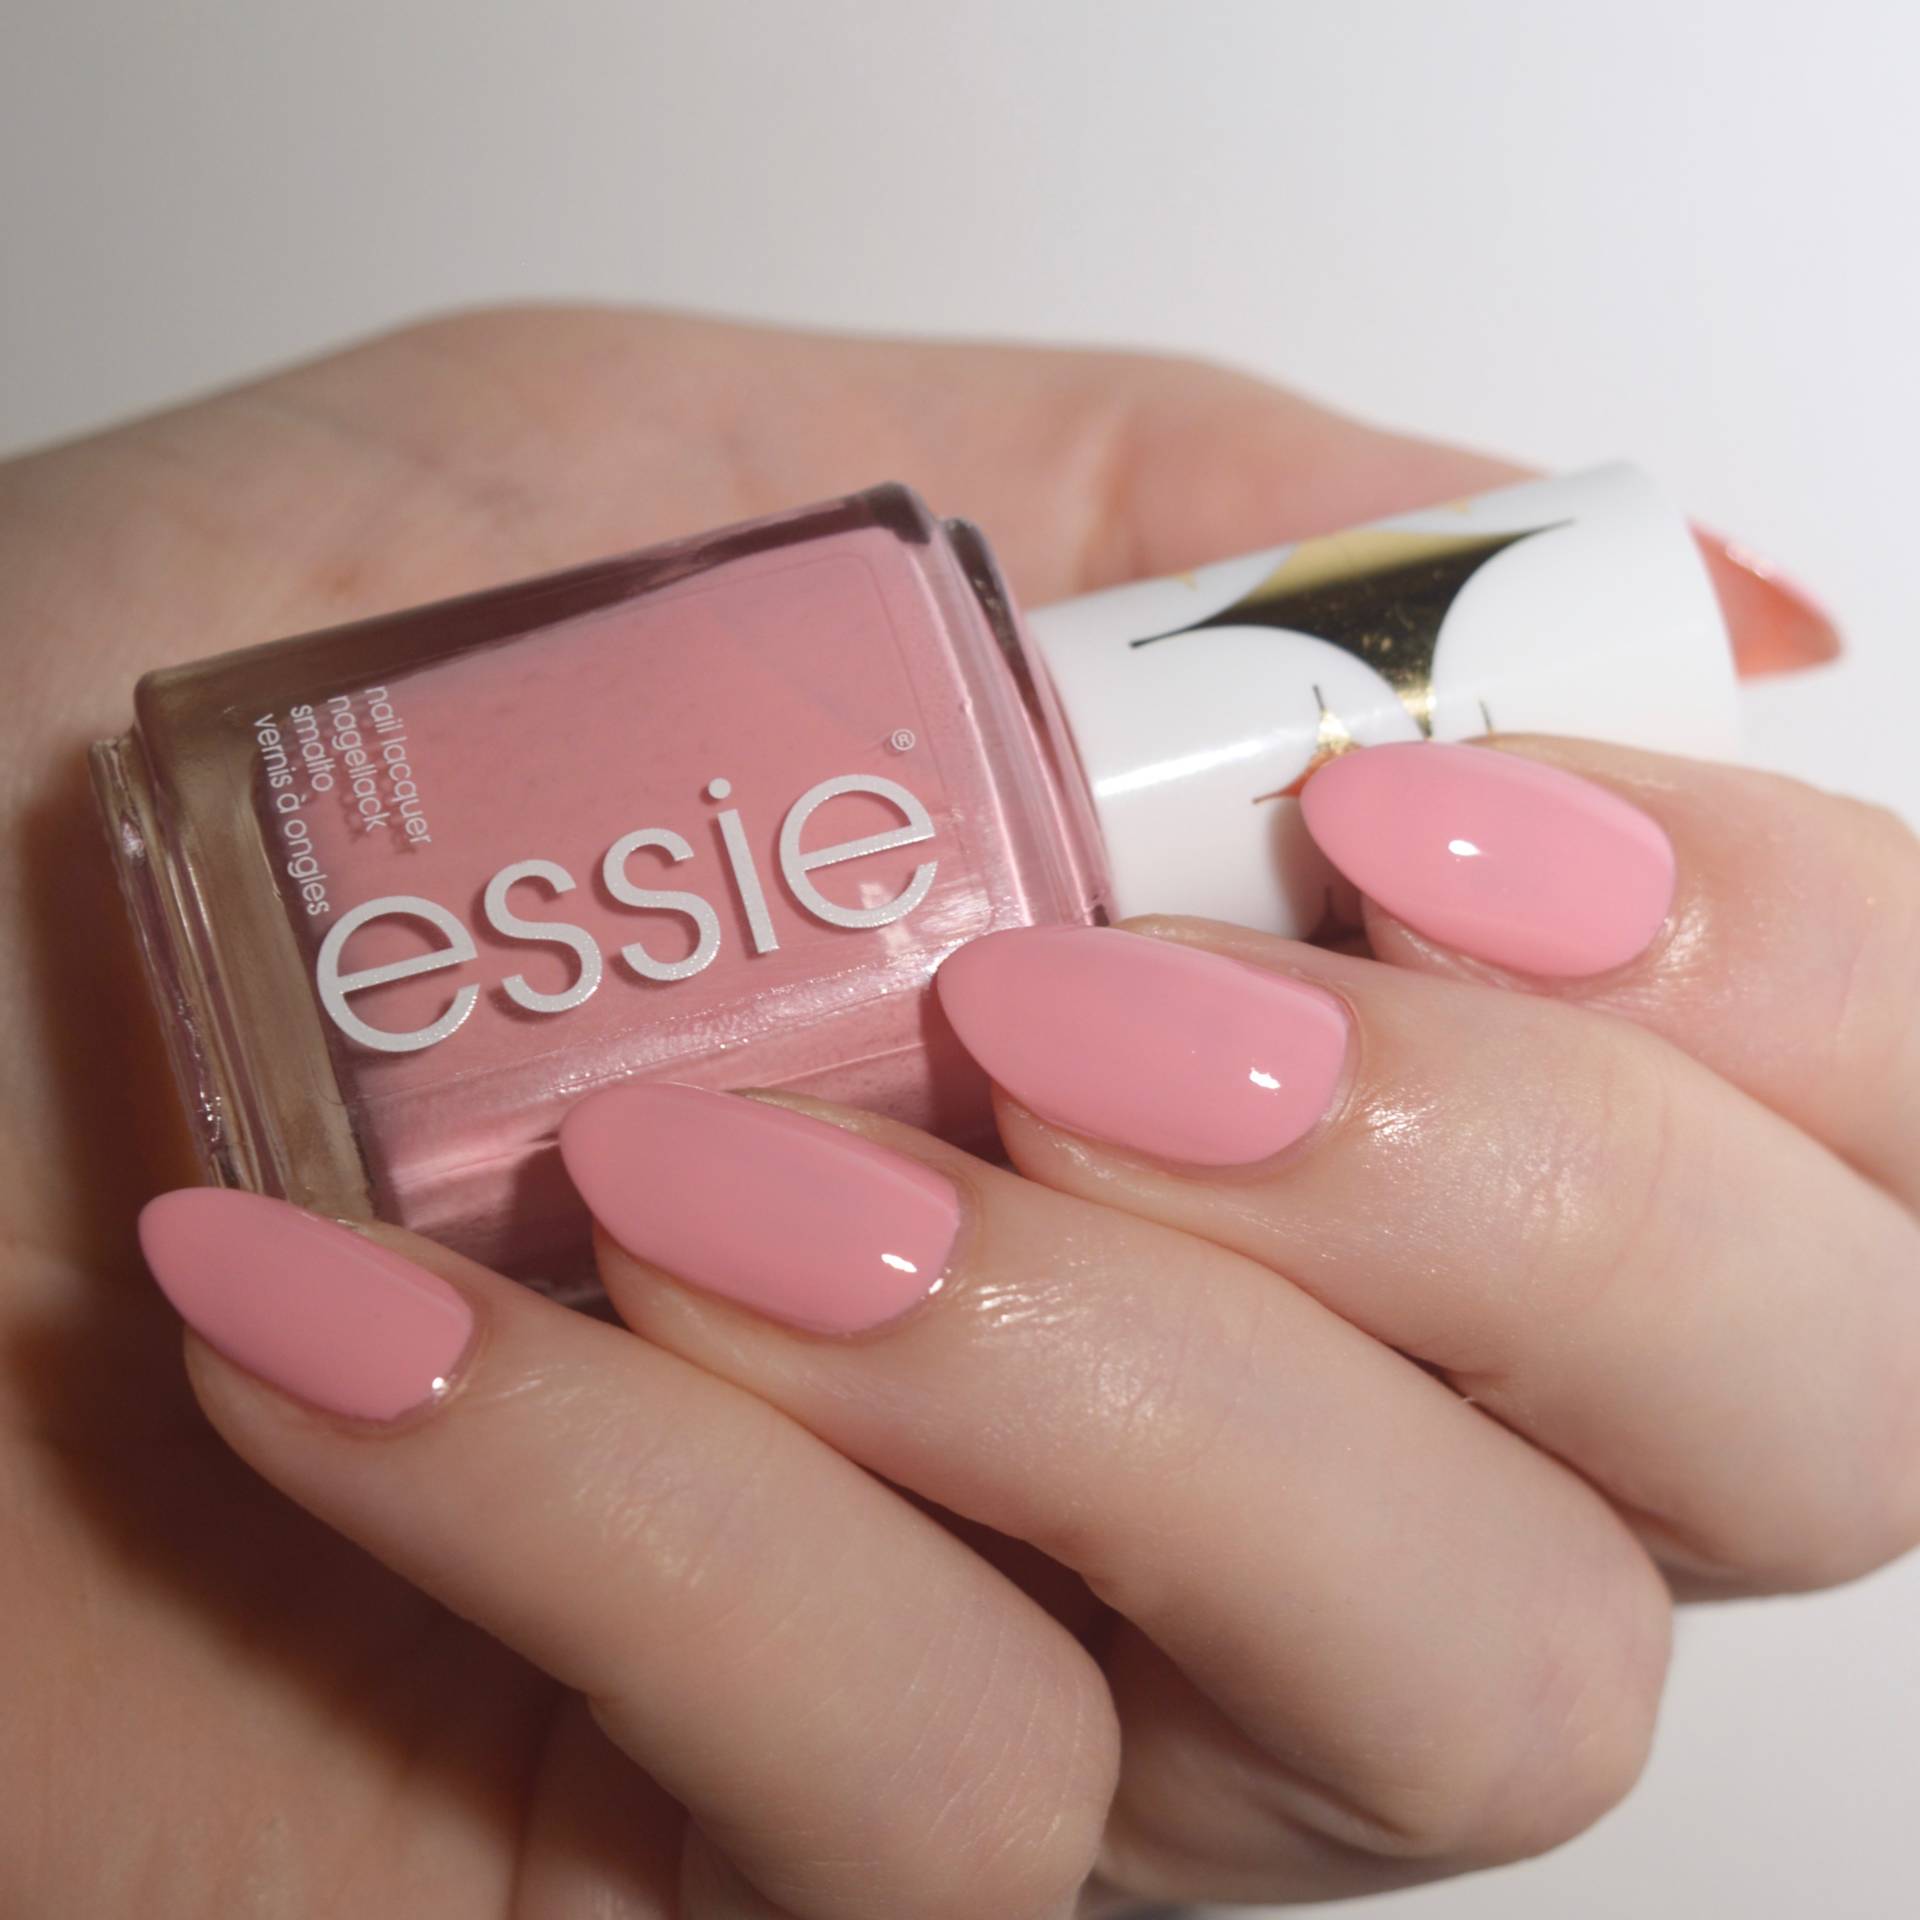 Essie 'Flawless' from the Retro Revival 2017 collection. I love this muted blush pink nail polish.